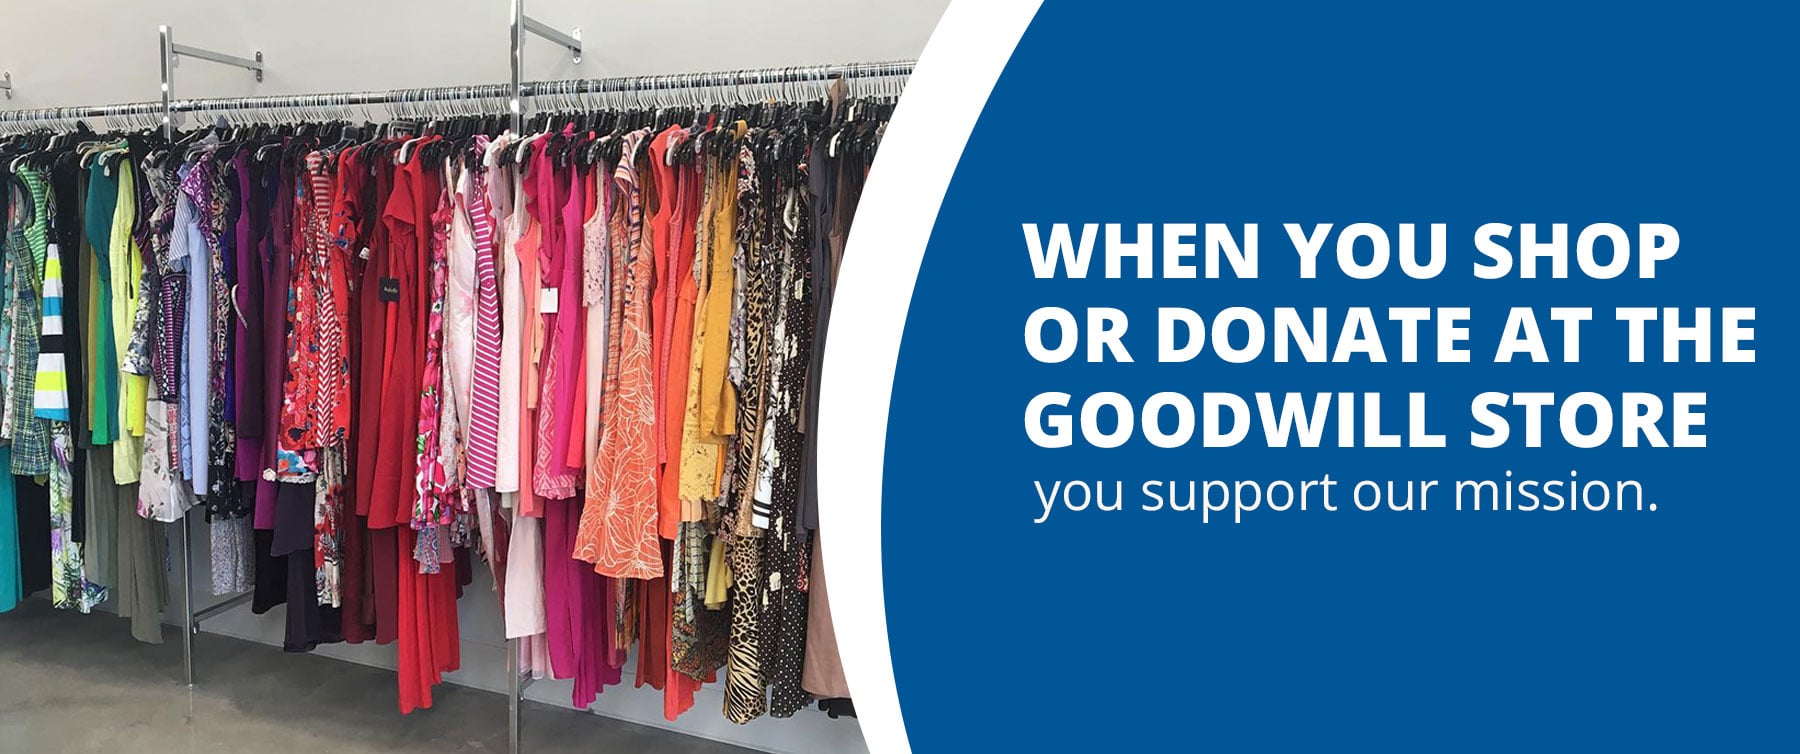 When you shop or donate at the Goodwill store you support our mission.